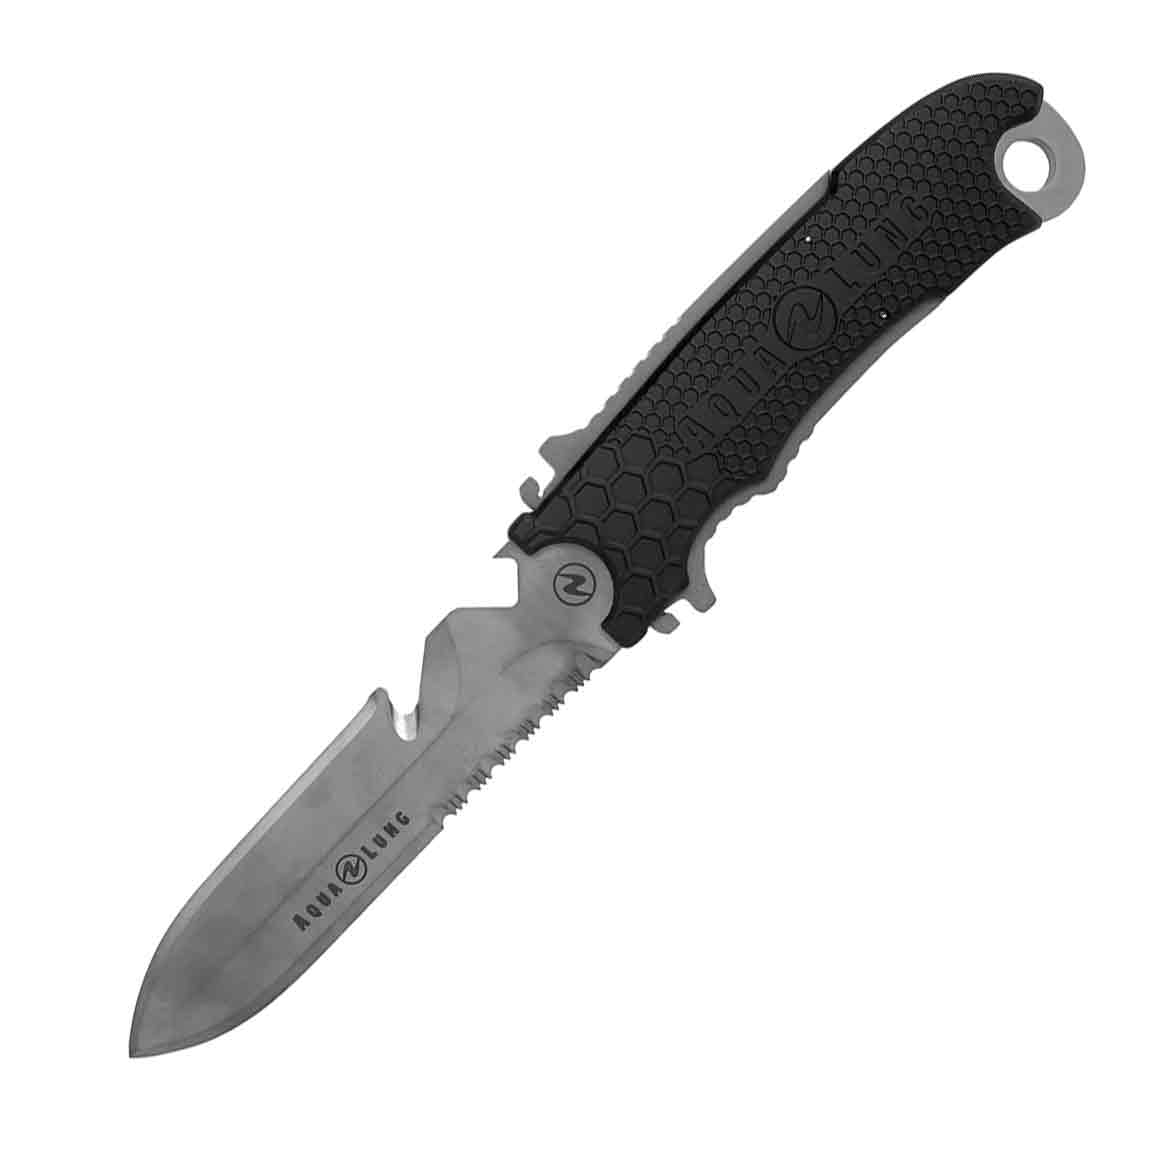 Koah Standard 4.5 Inch Dive Knife with Magnetic Sheath